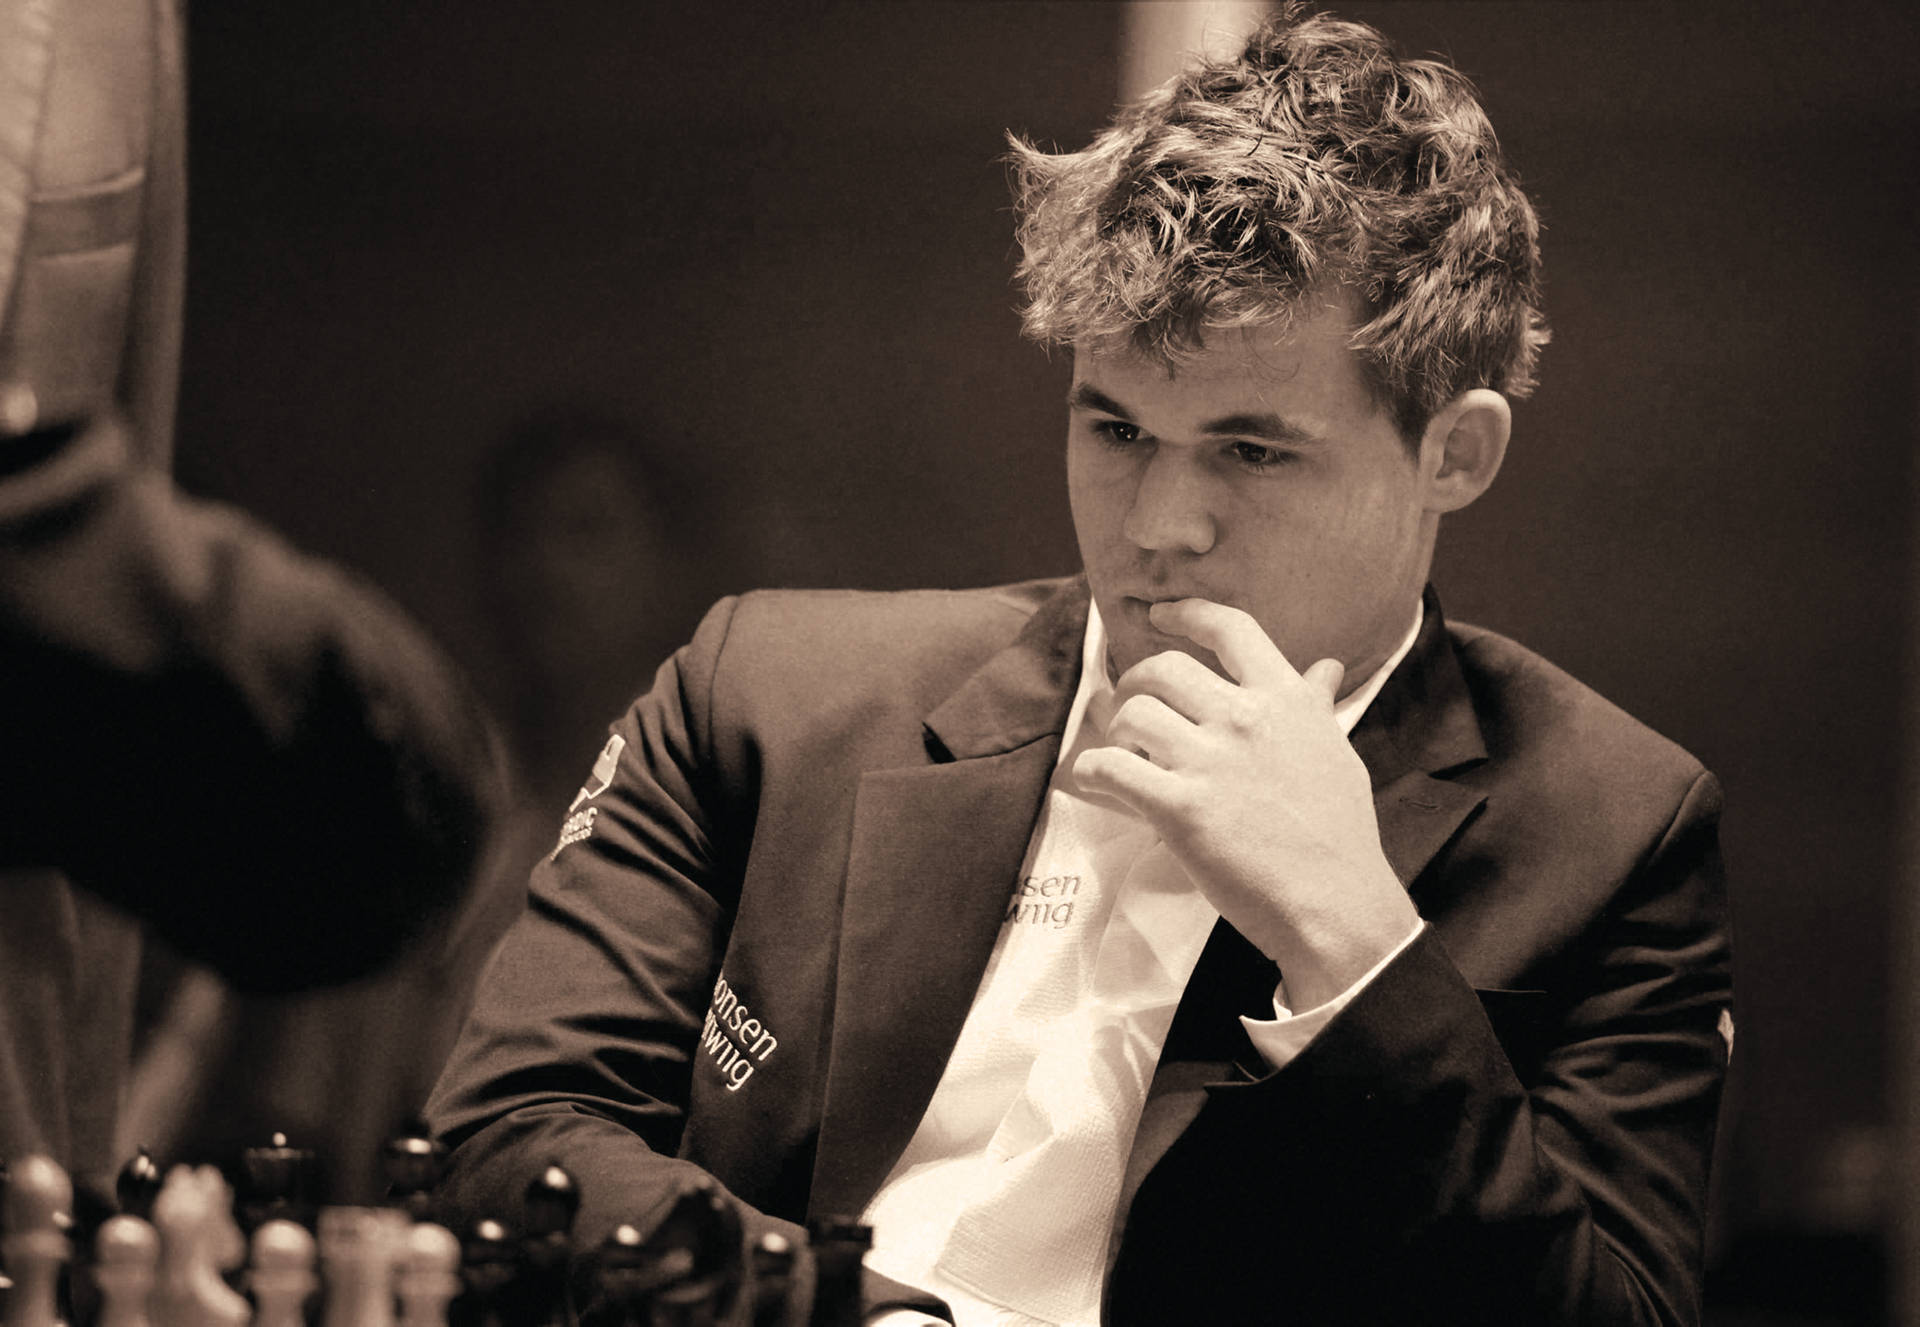 Reflekterandemagnus Carlsen (assuming You Are Referring To A Wallpaper Featuring The Chess Player Magnus Carlsen) Wallpaper